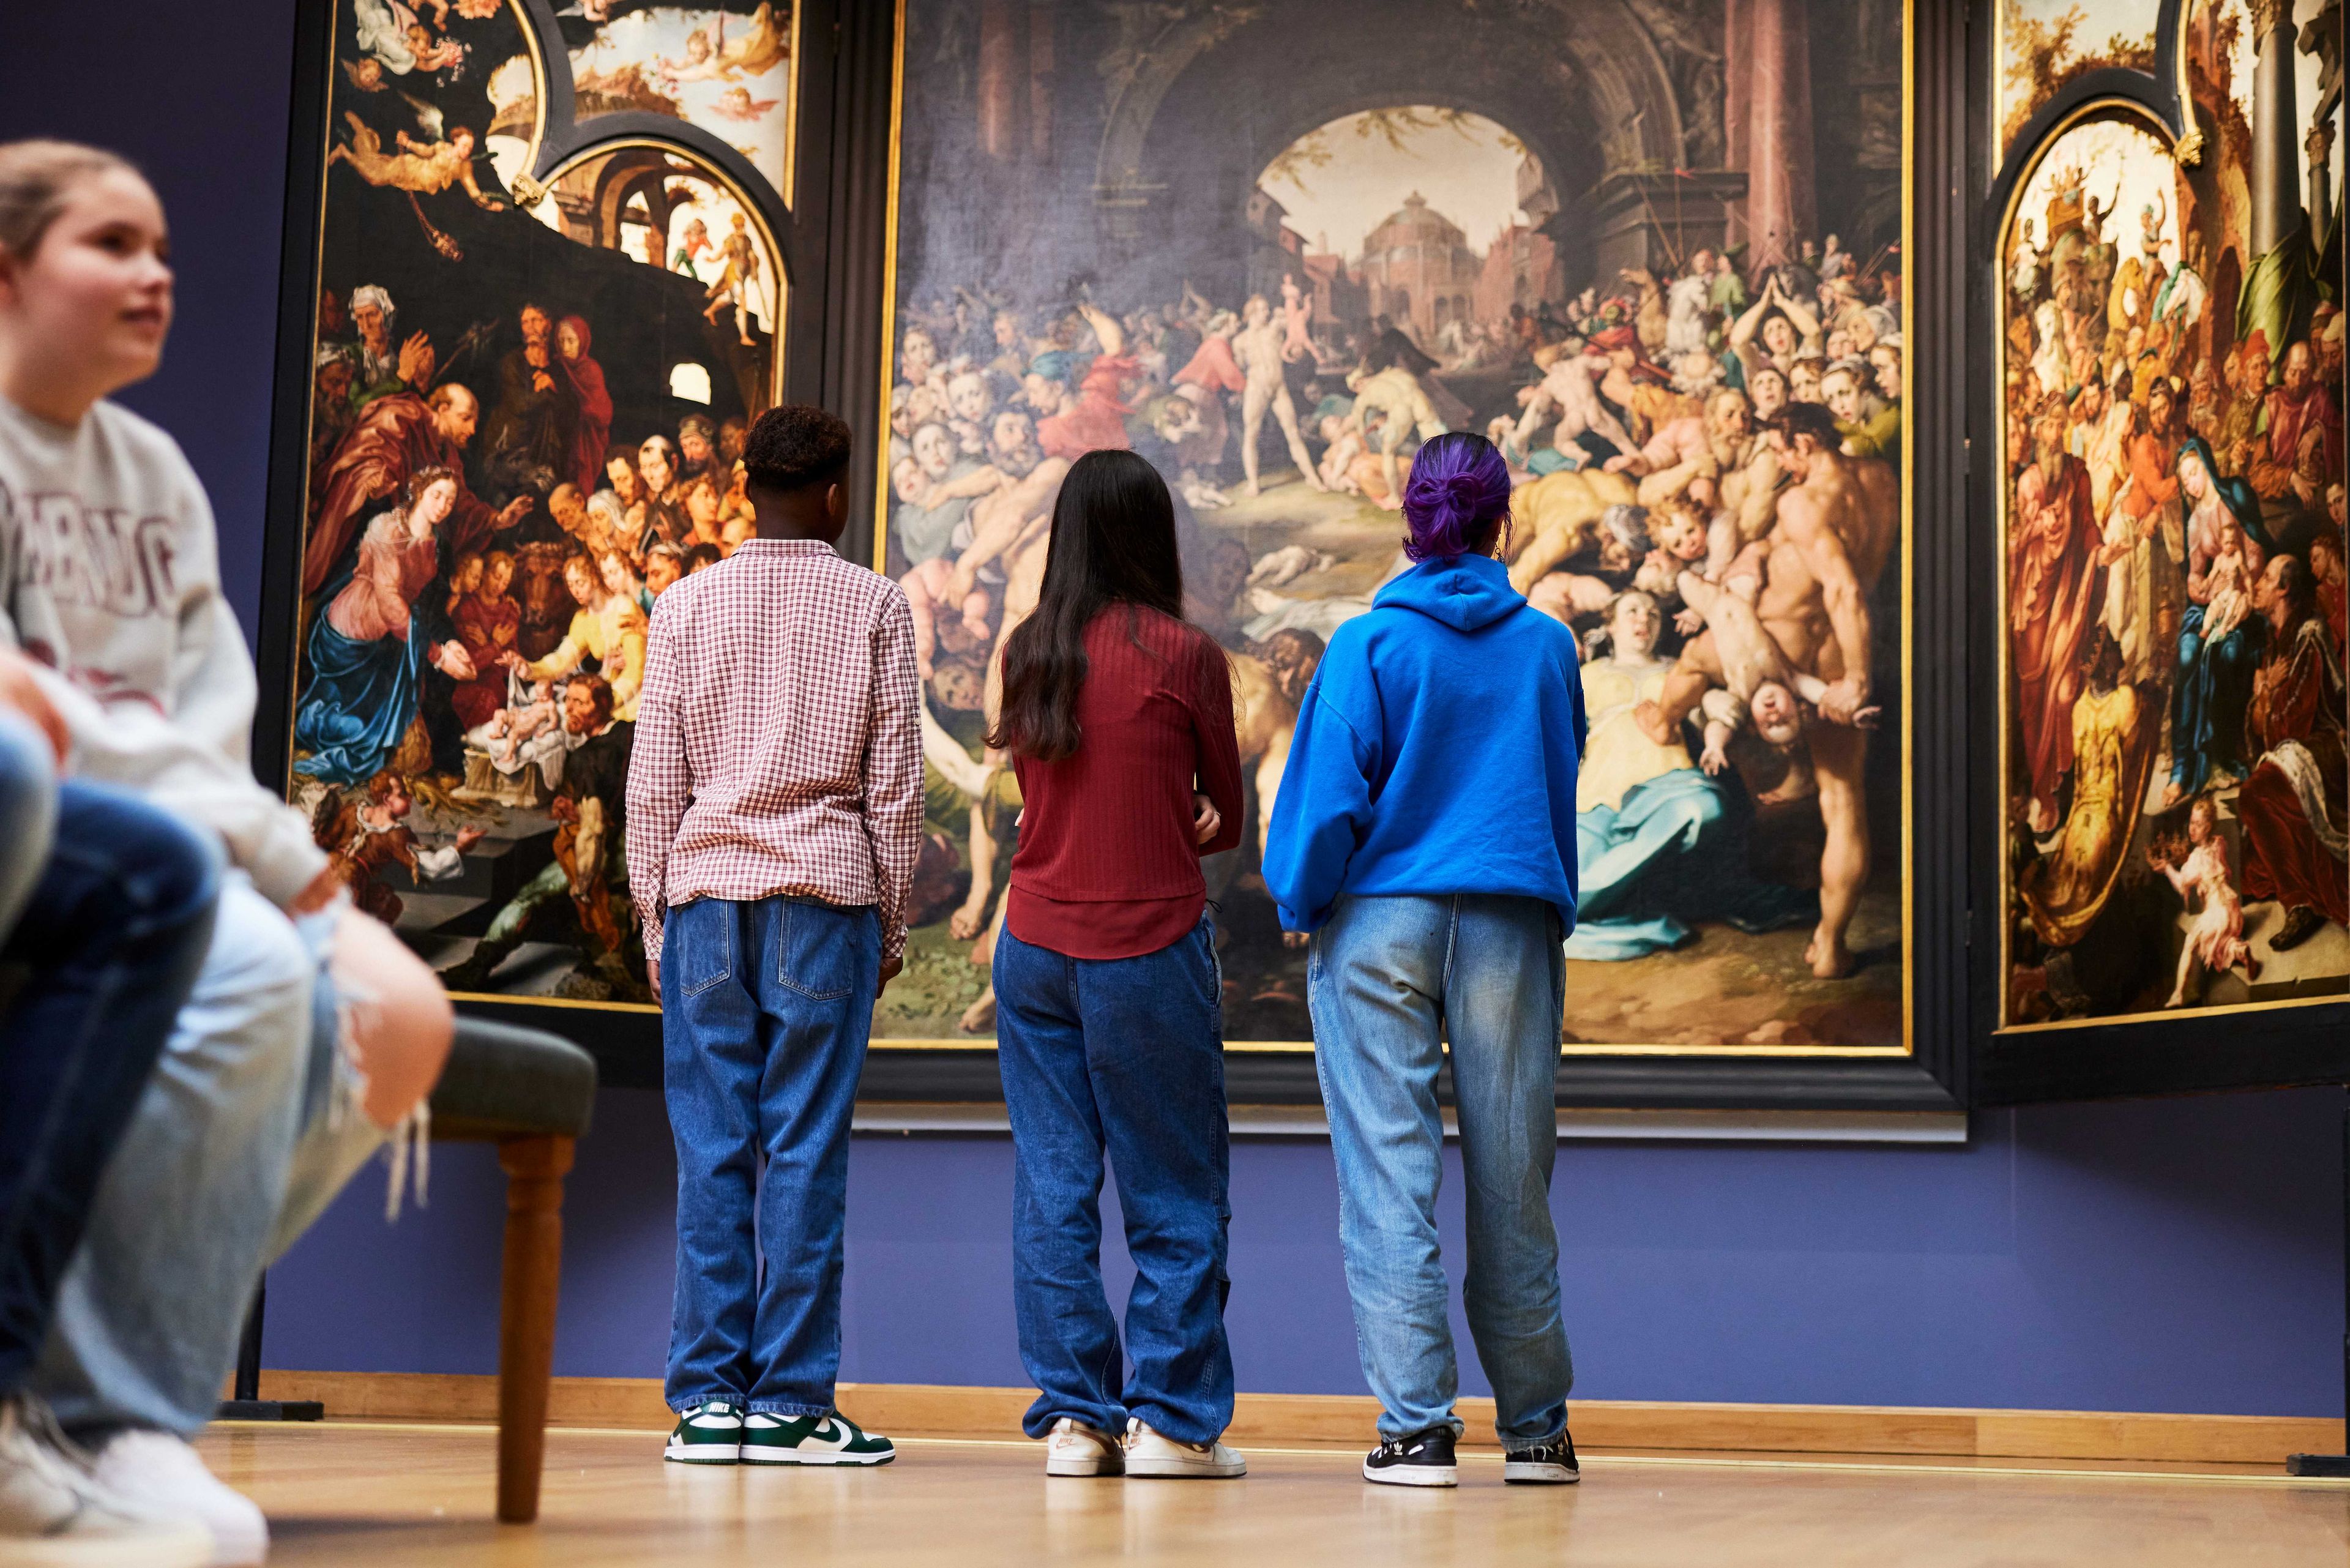 Secondary school pupils taking part in the Masterpieces guided tour at the Frans Hals Museum.